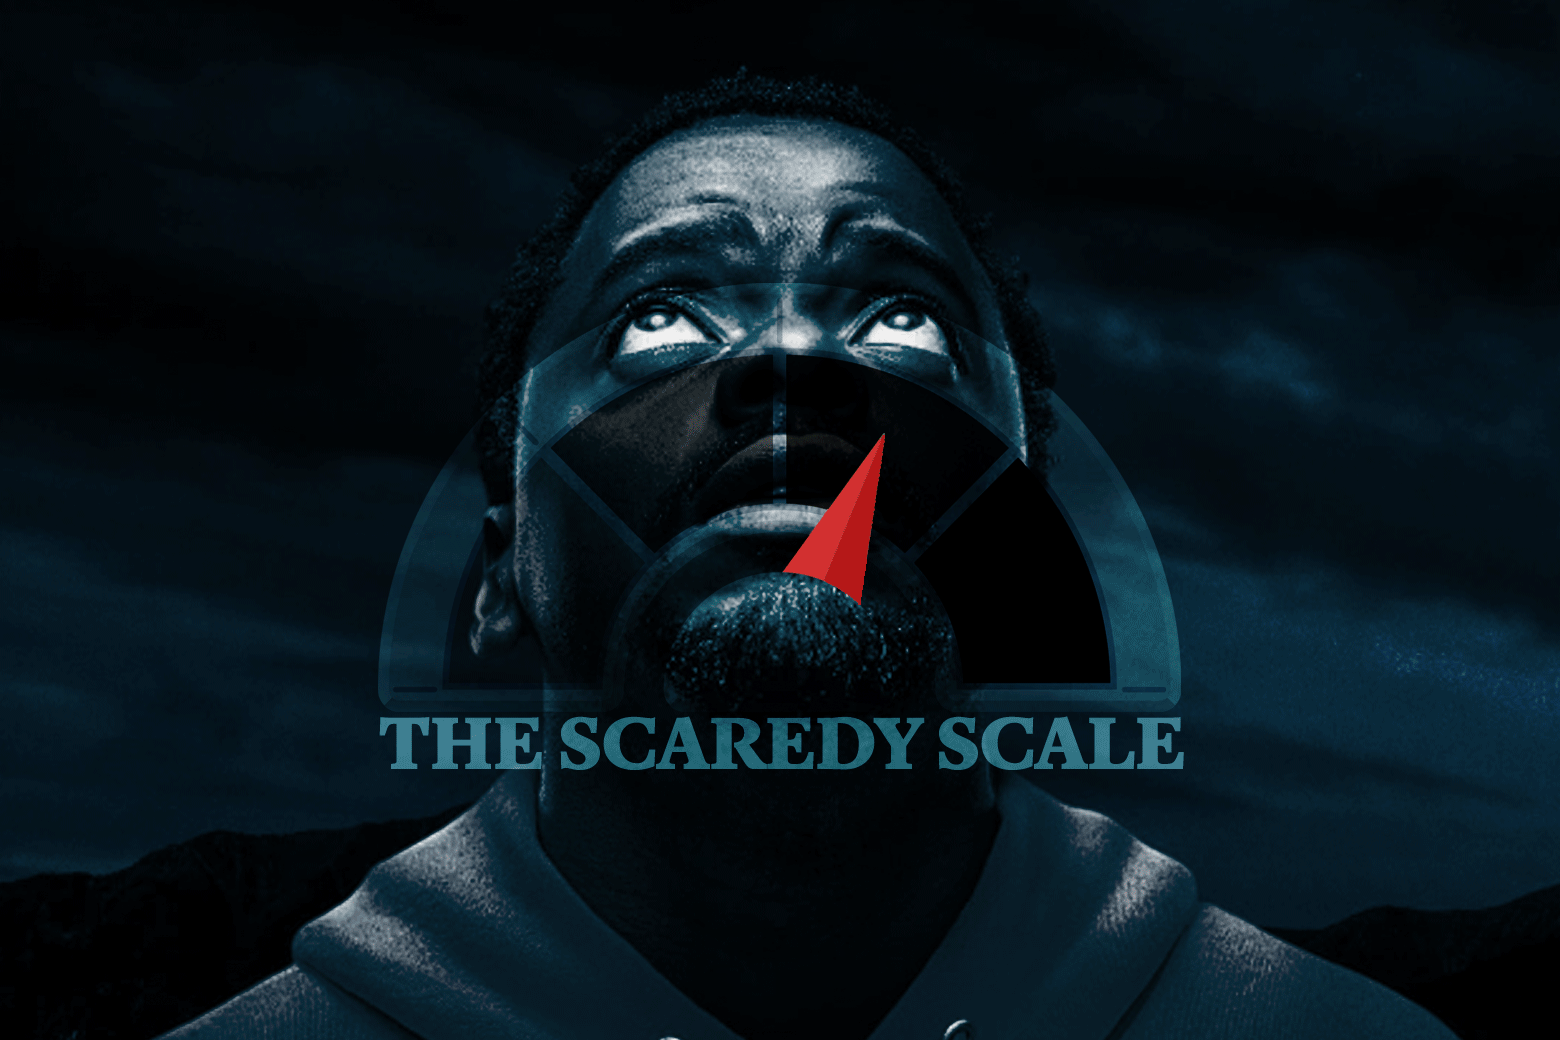 A still from Nope showing Daniel Kaluuya looks up. Over his face, an animated GIF superimposes a twitching meter and the words "The Scaredy Scale."